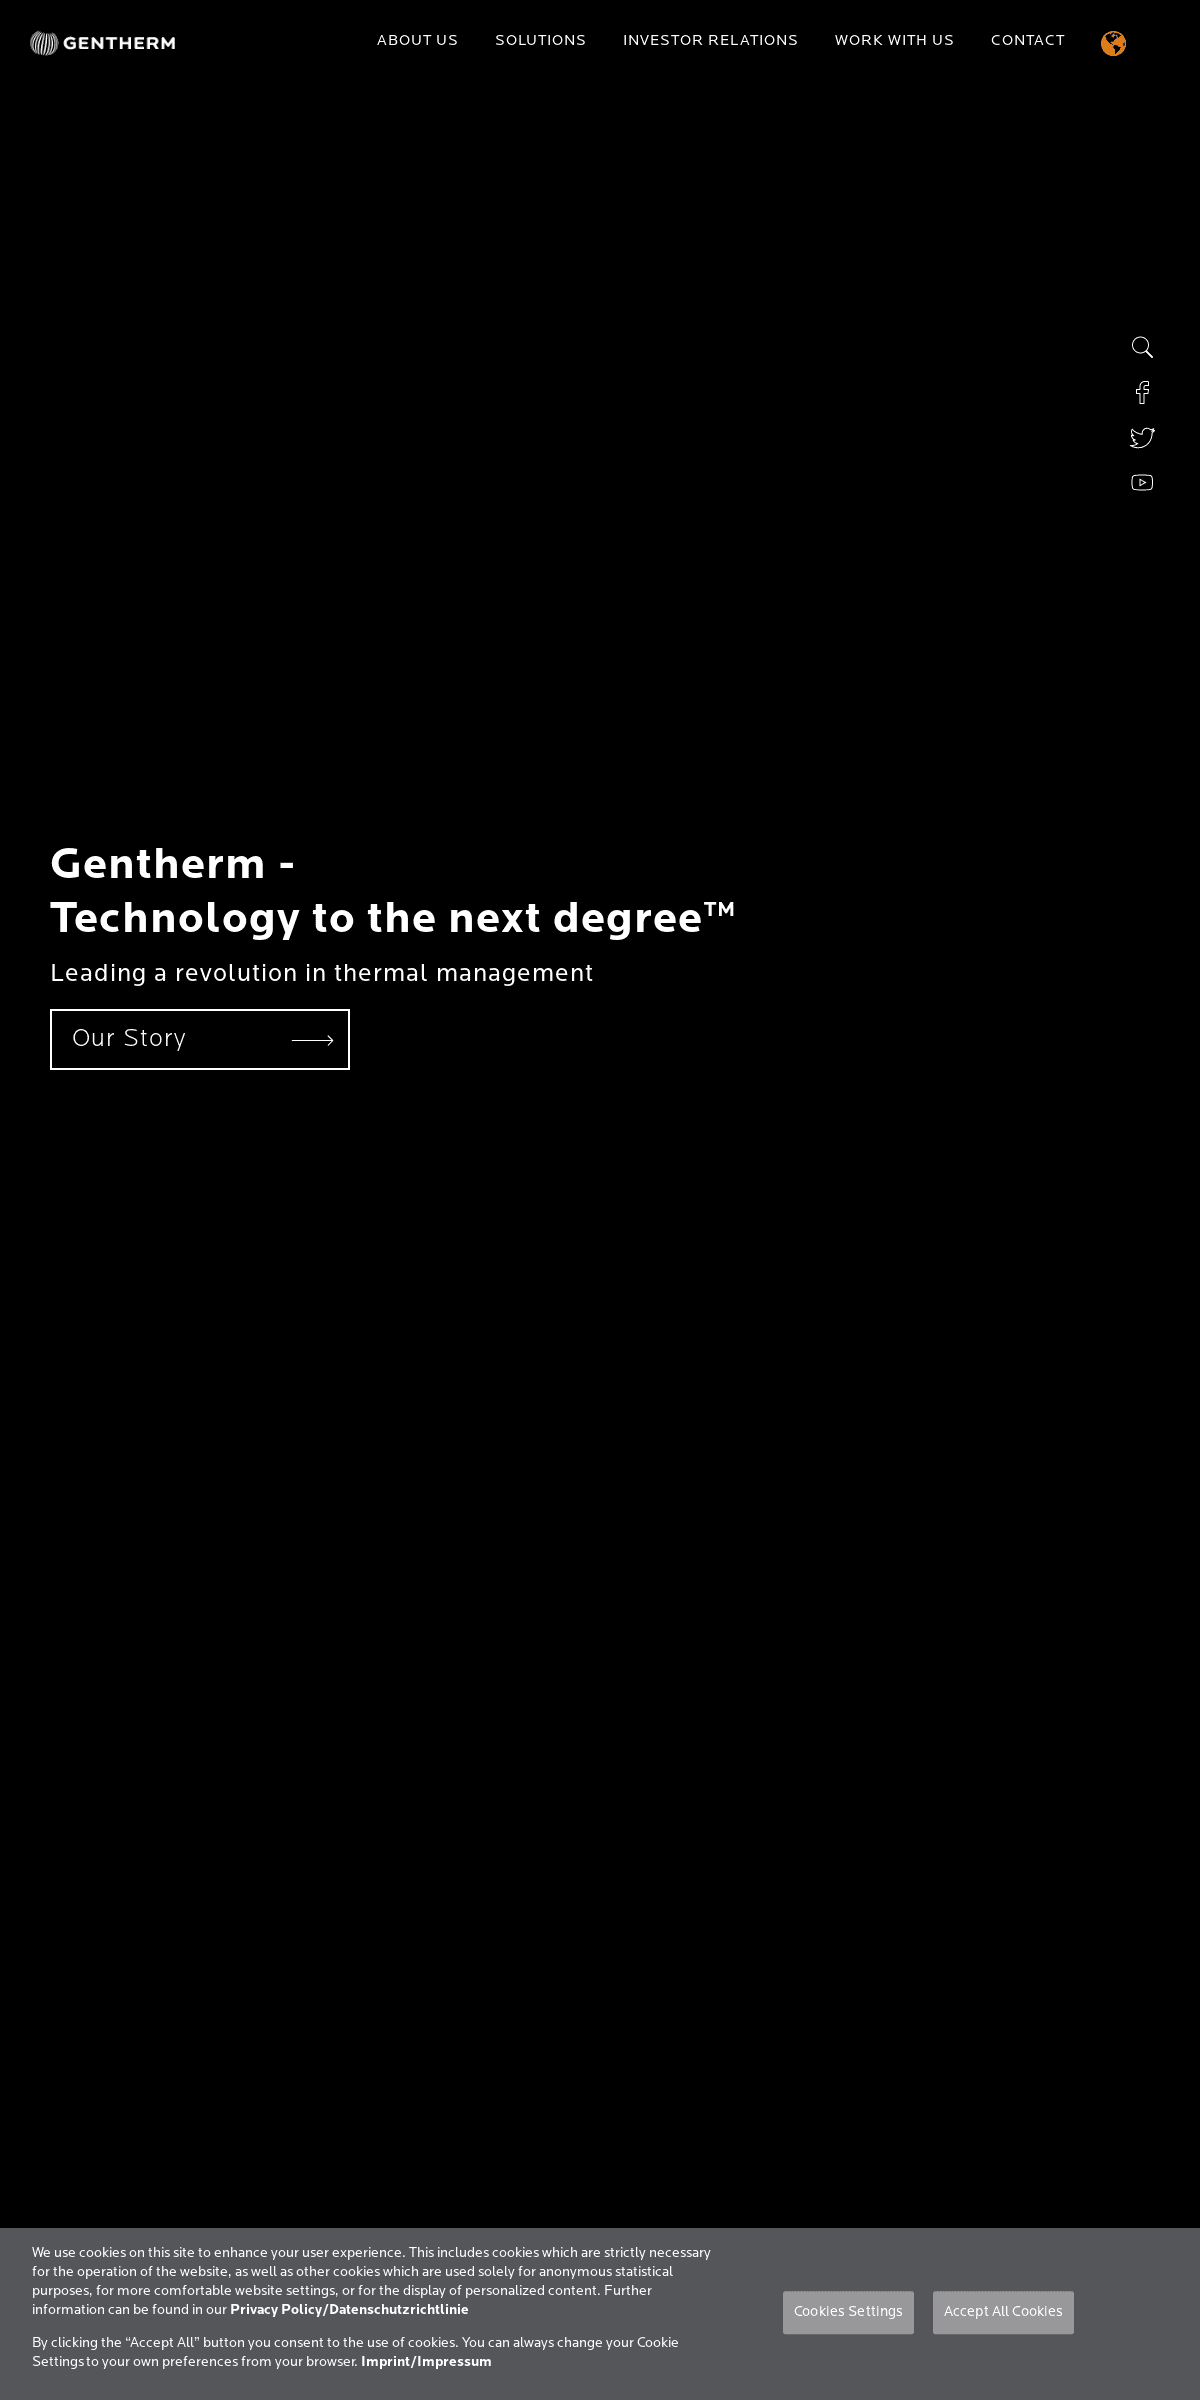 A complete backup of gentherm.com